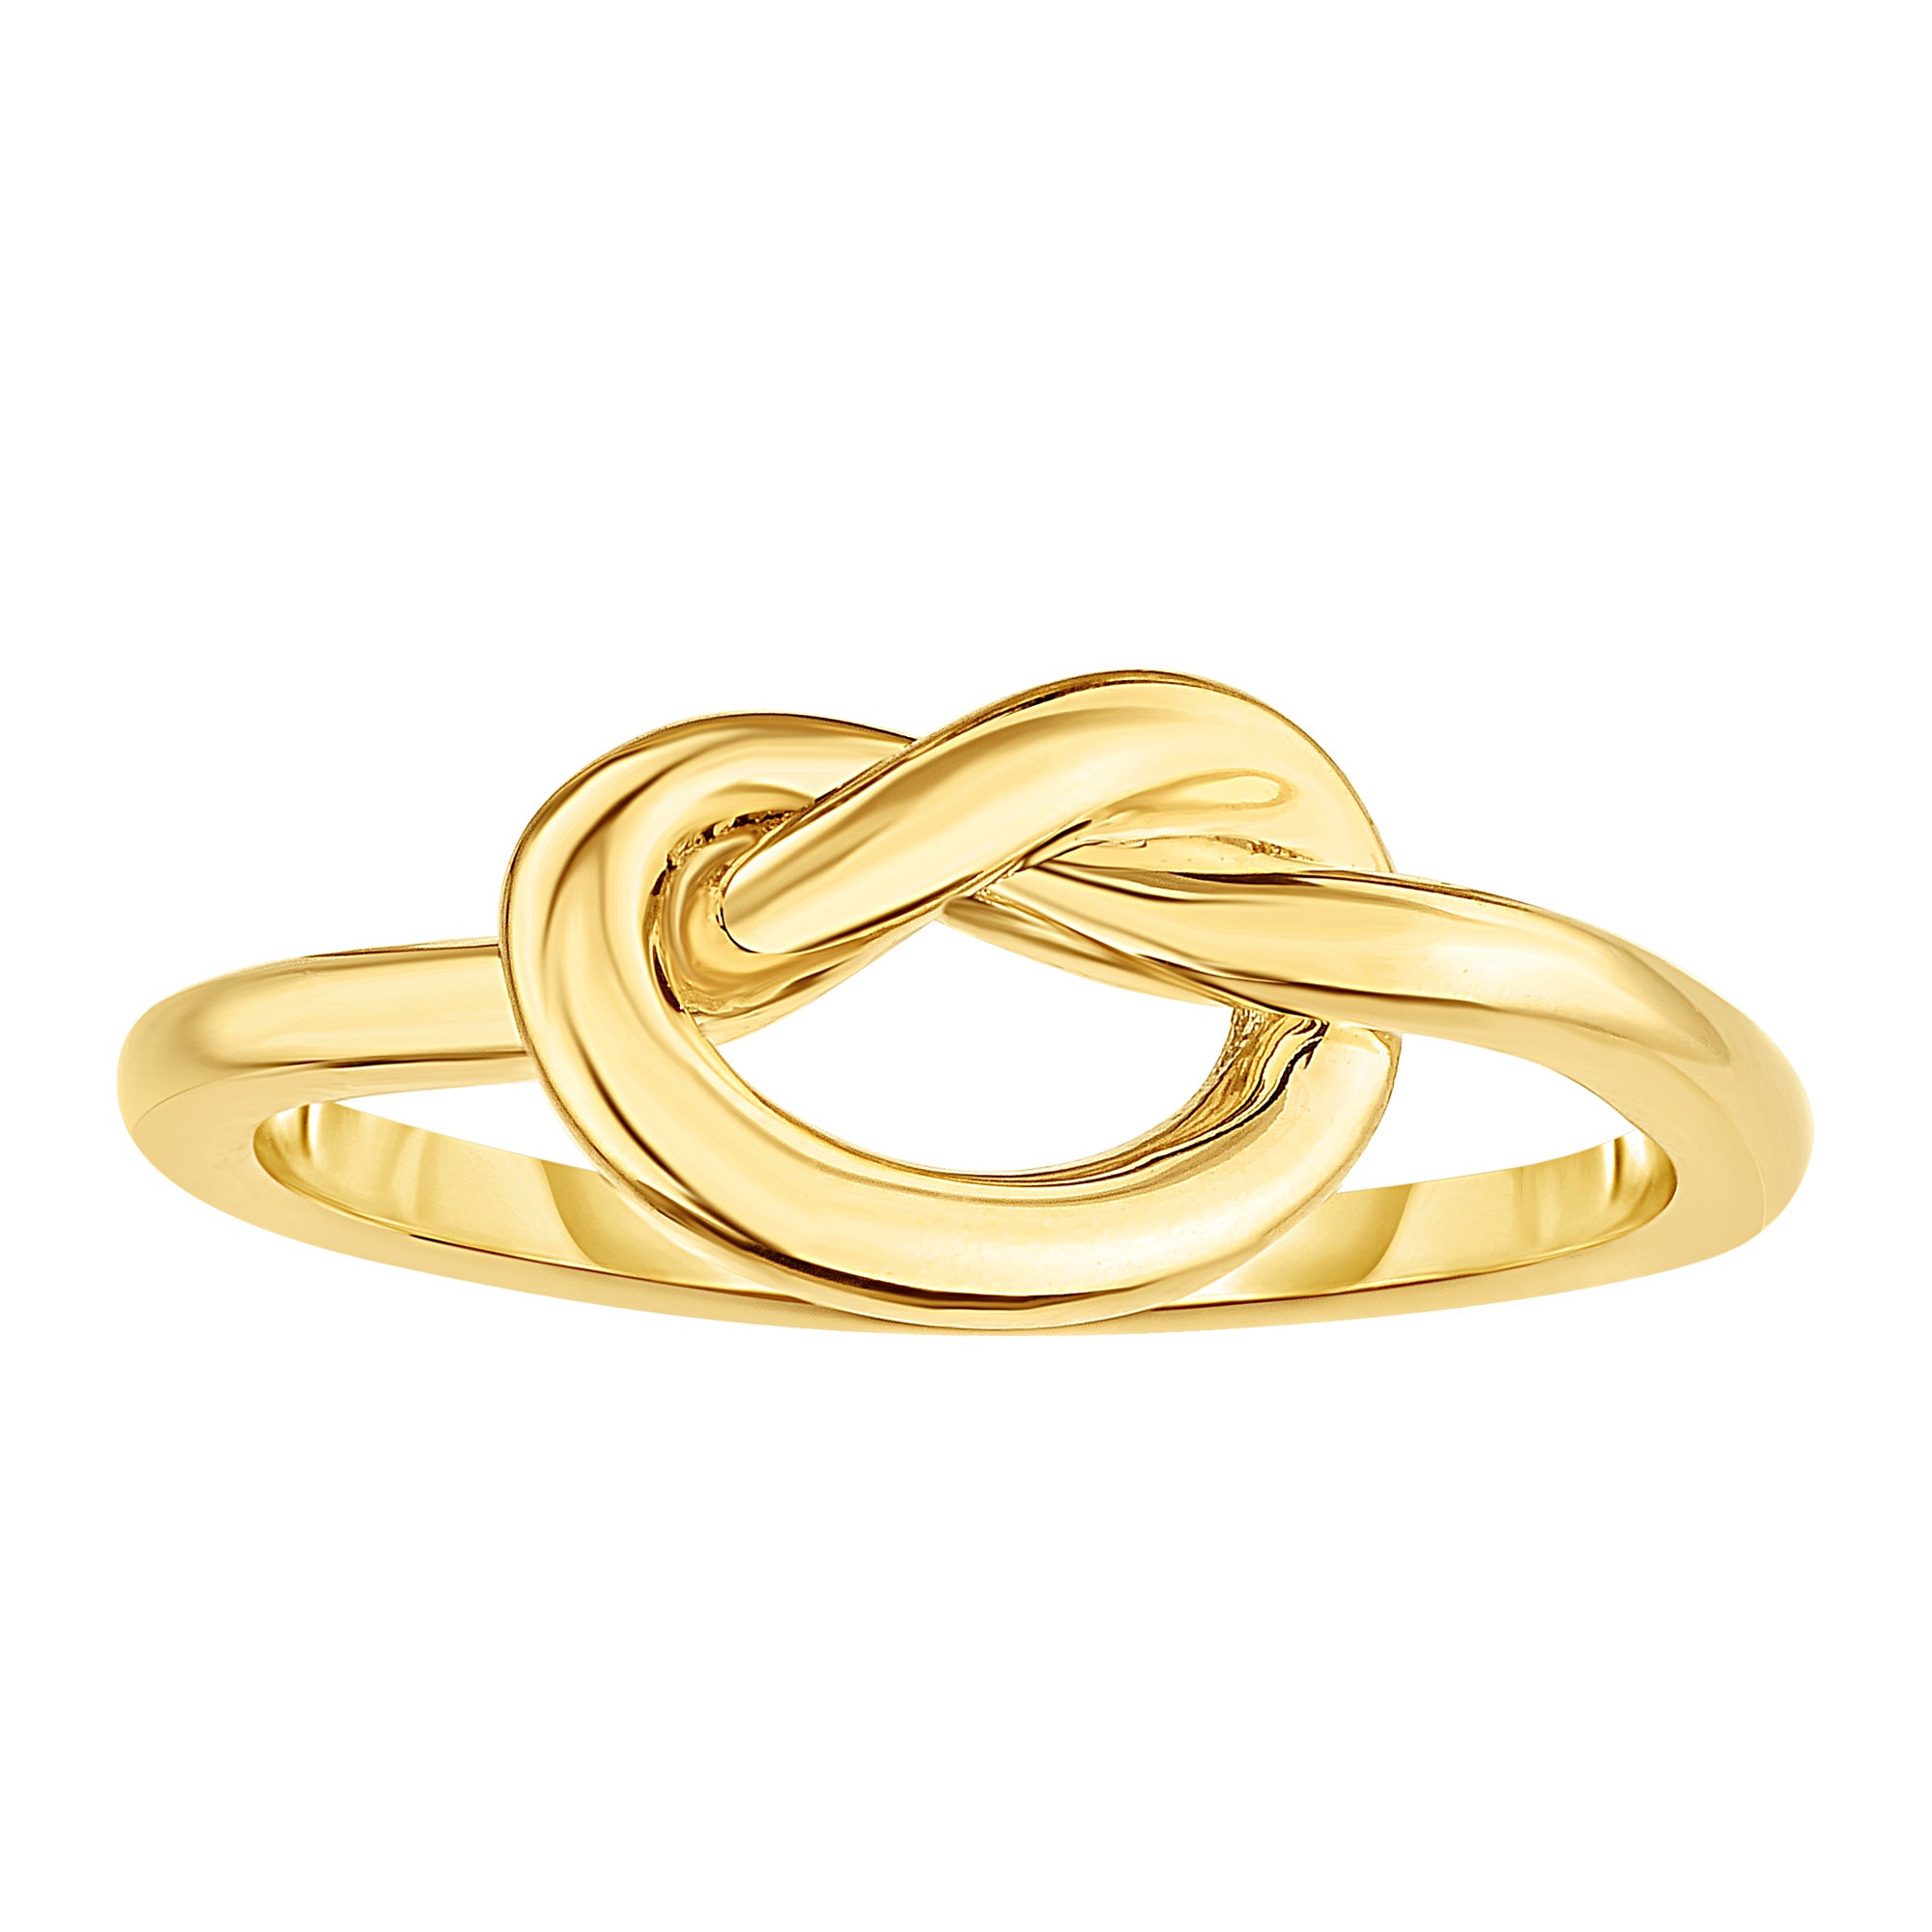 14K Yellow Gold Lovers Love Knot Pretzel Ring, Size 7 fine designer jewelry for men and women